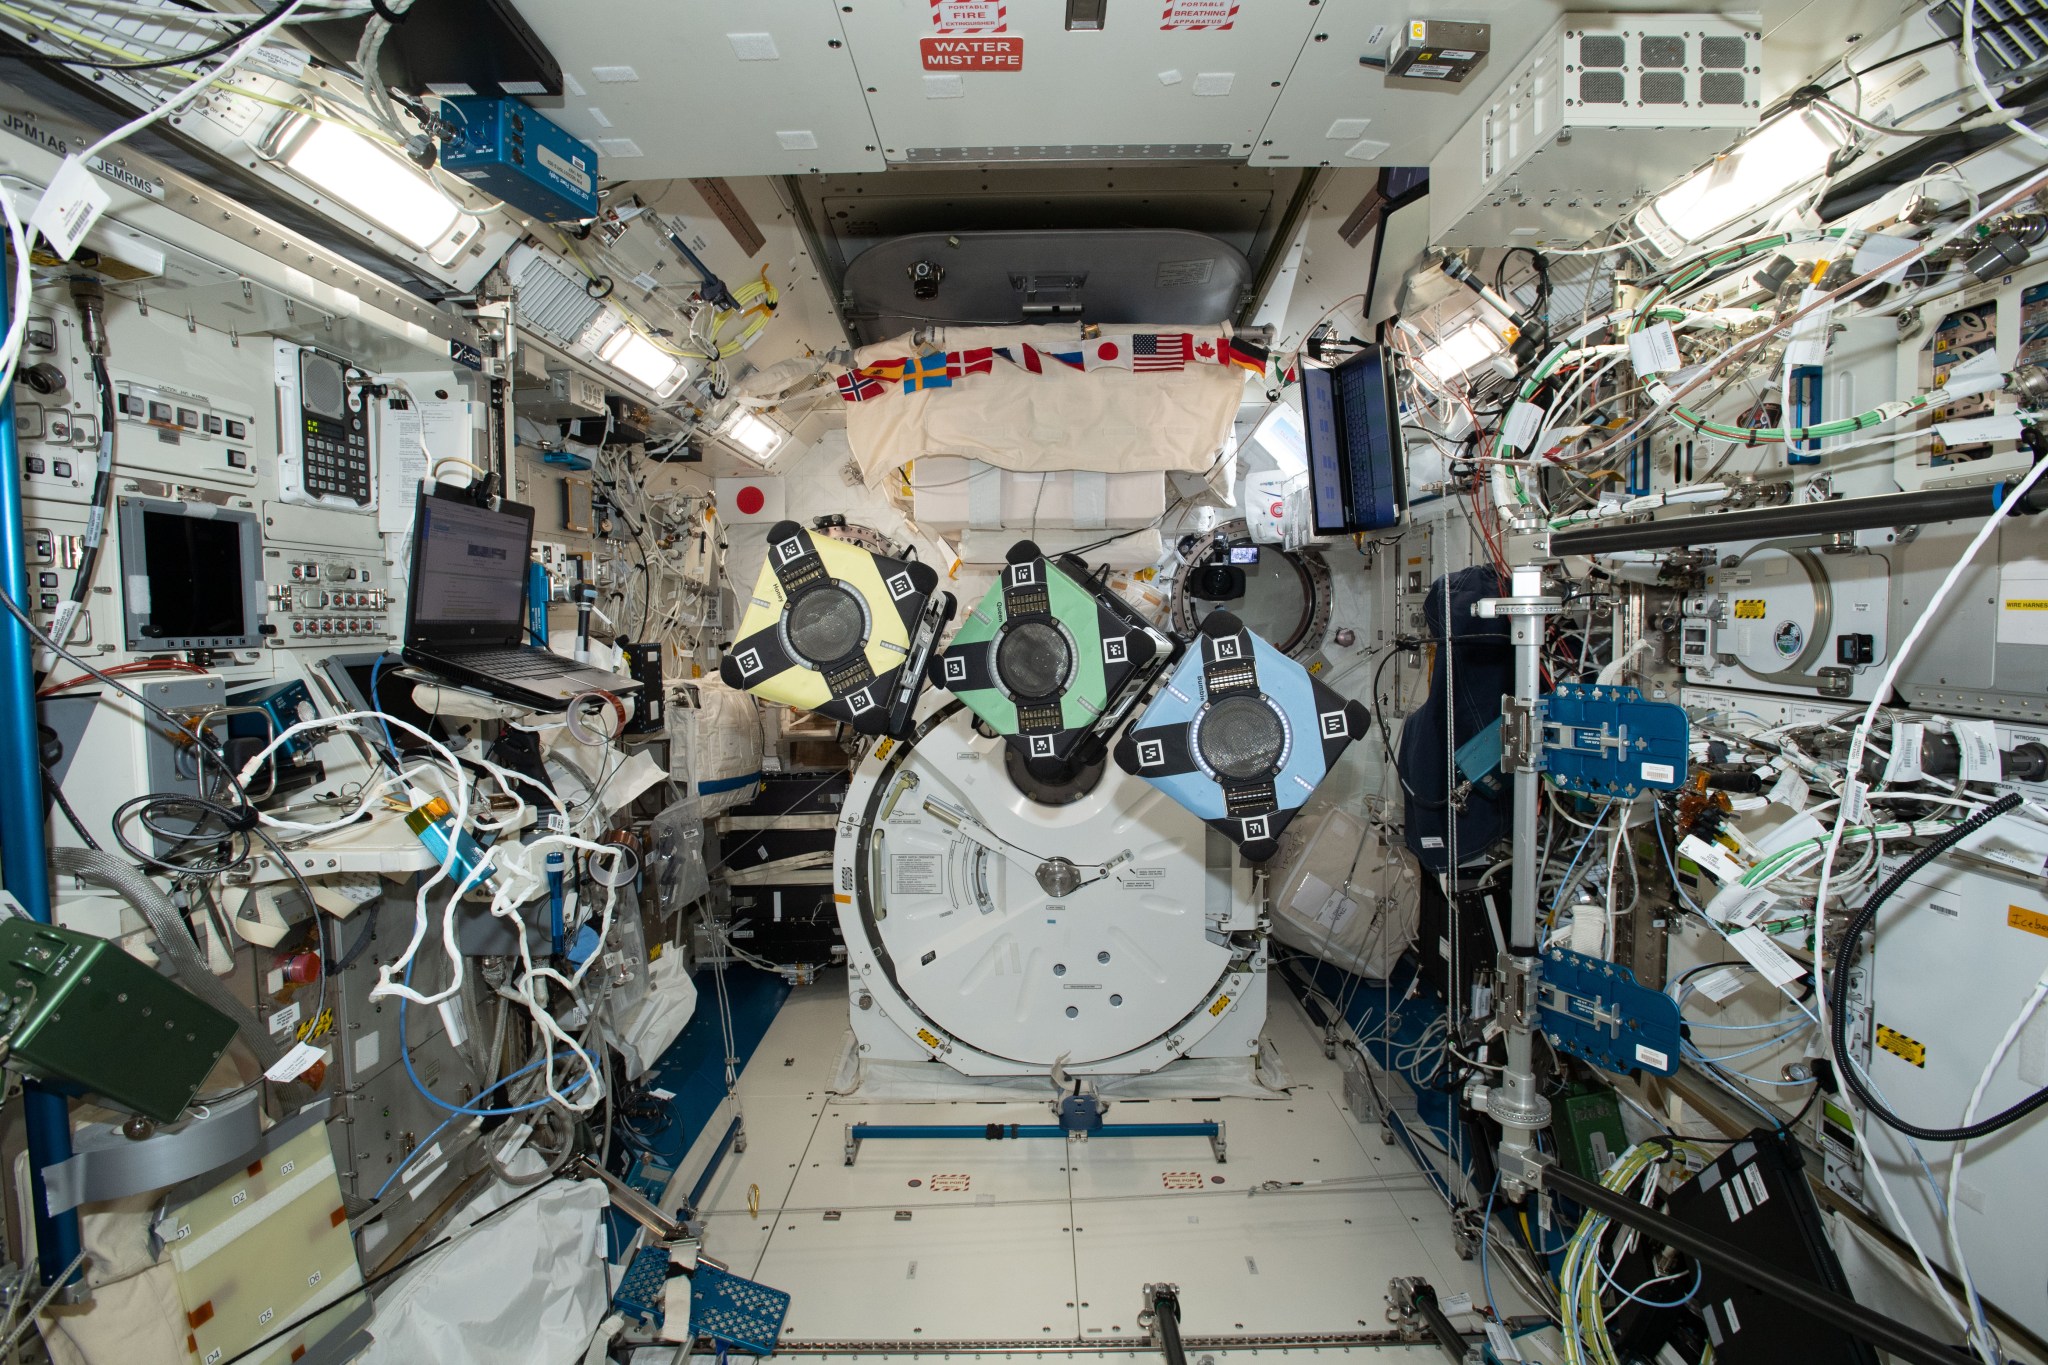 The space station’s free-flying Astrobees shown in this image support Zero Robotics, a program where students compete to write software to control one of the robots.